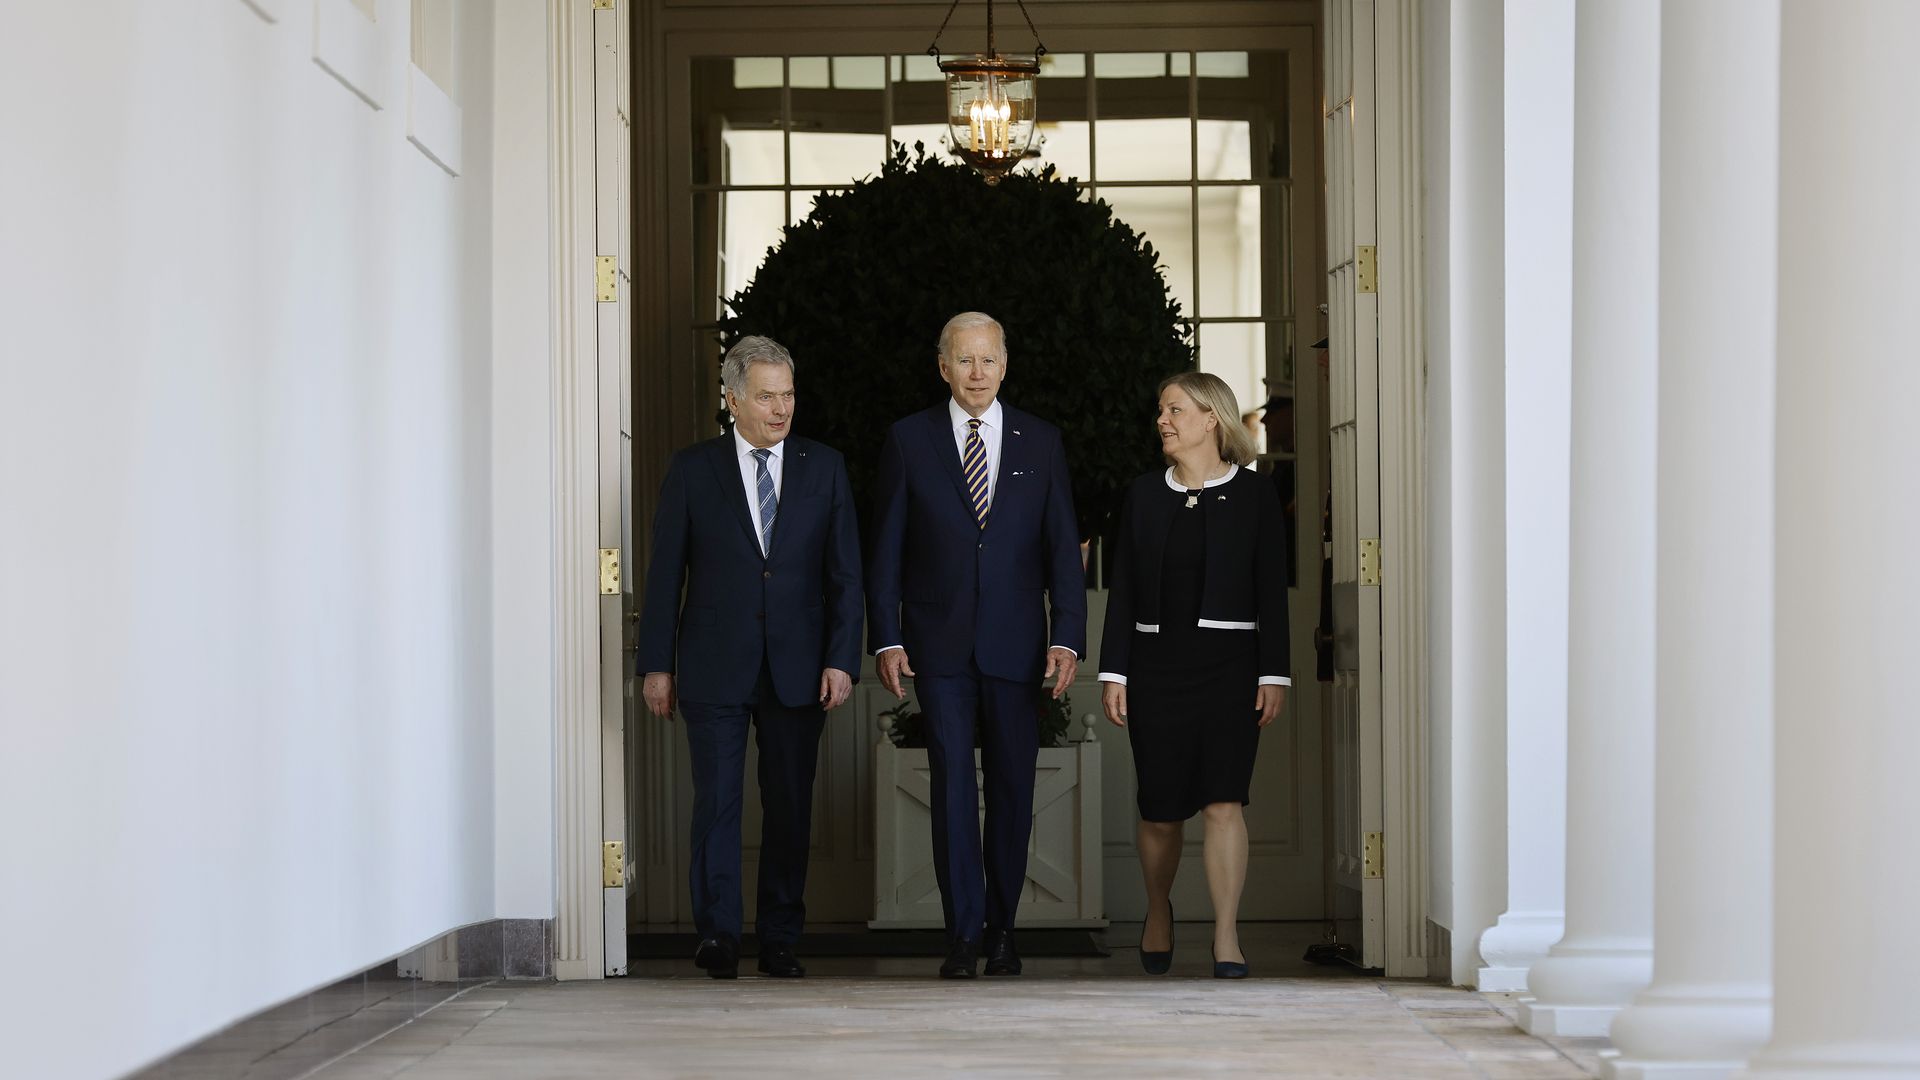 President Biden is seen walking to the Oval Office with the leaders of Finland and Sweden.